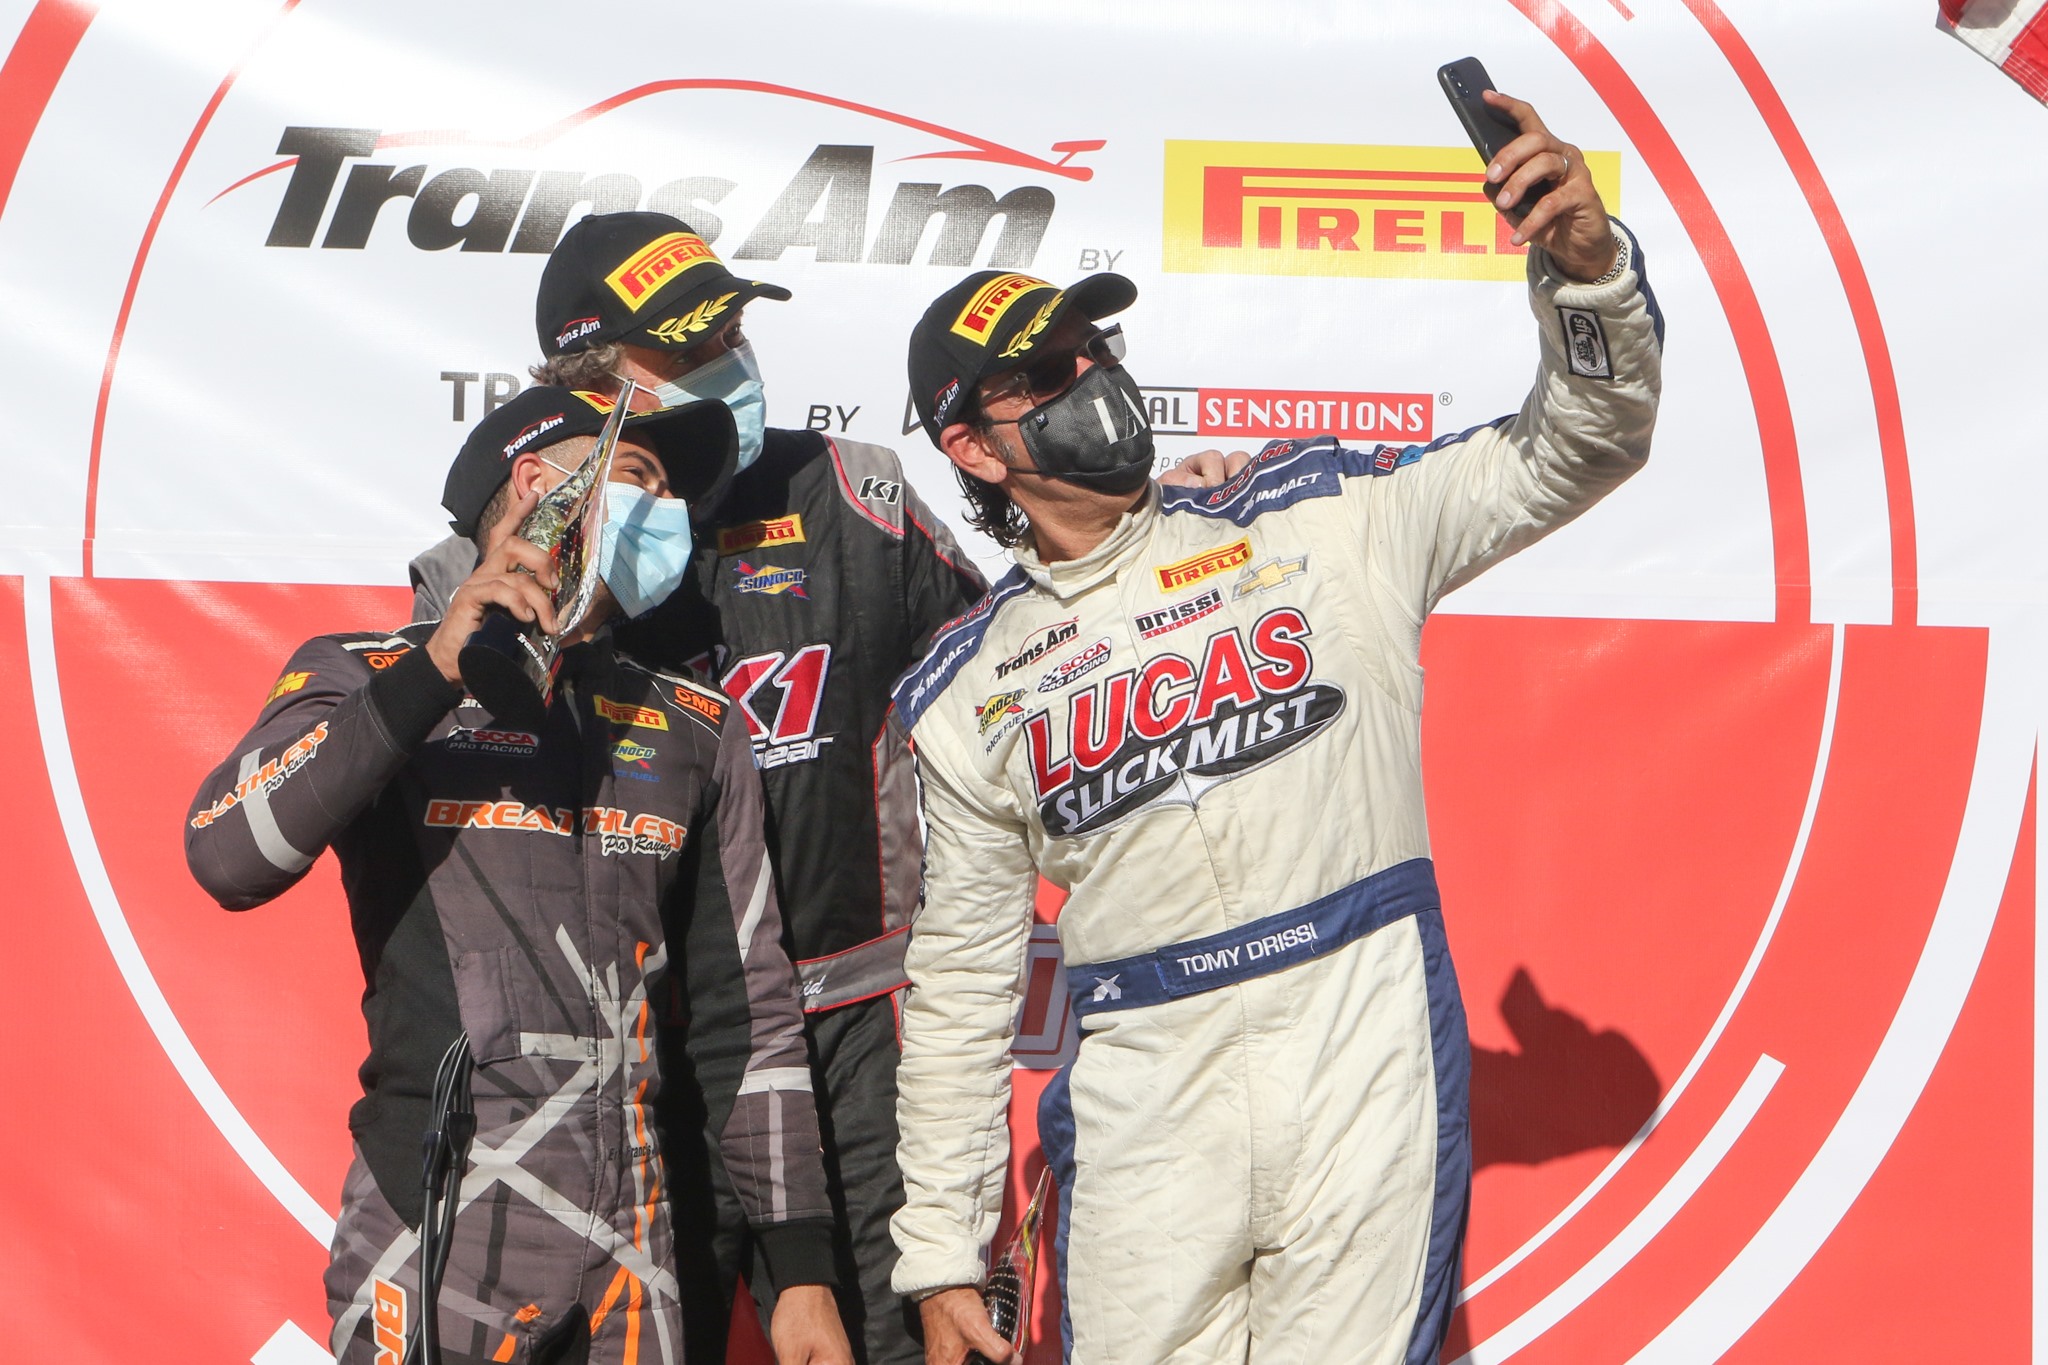 Another Podium for the Lucas SlickMist Driver Tomy Drissi in Texas for the Trans Am Presented by Pirelli Championship